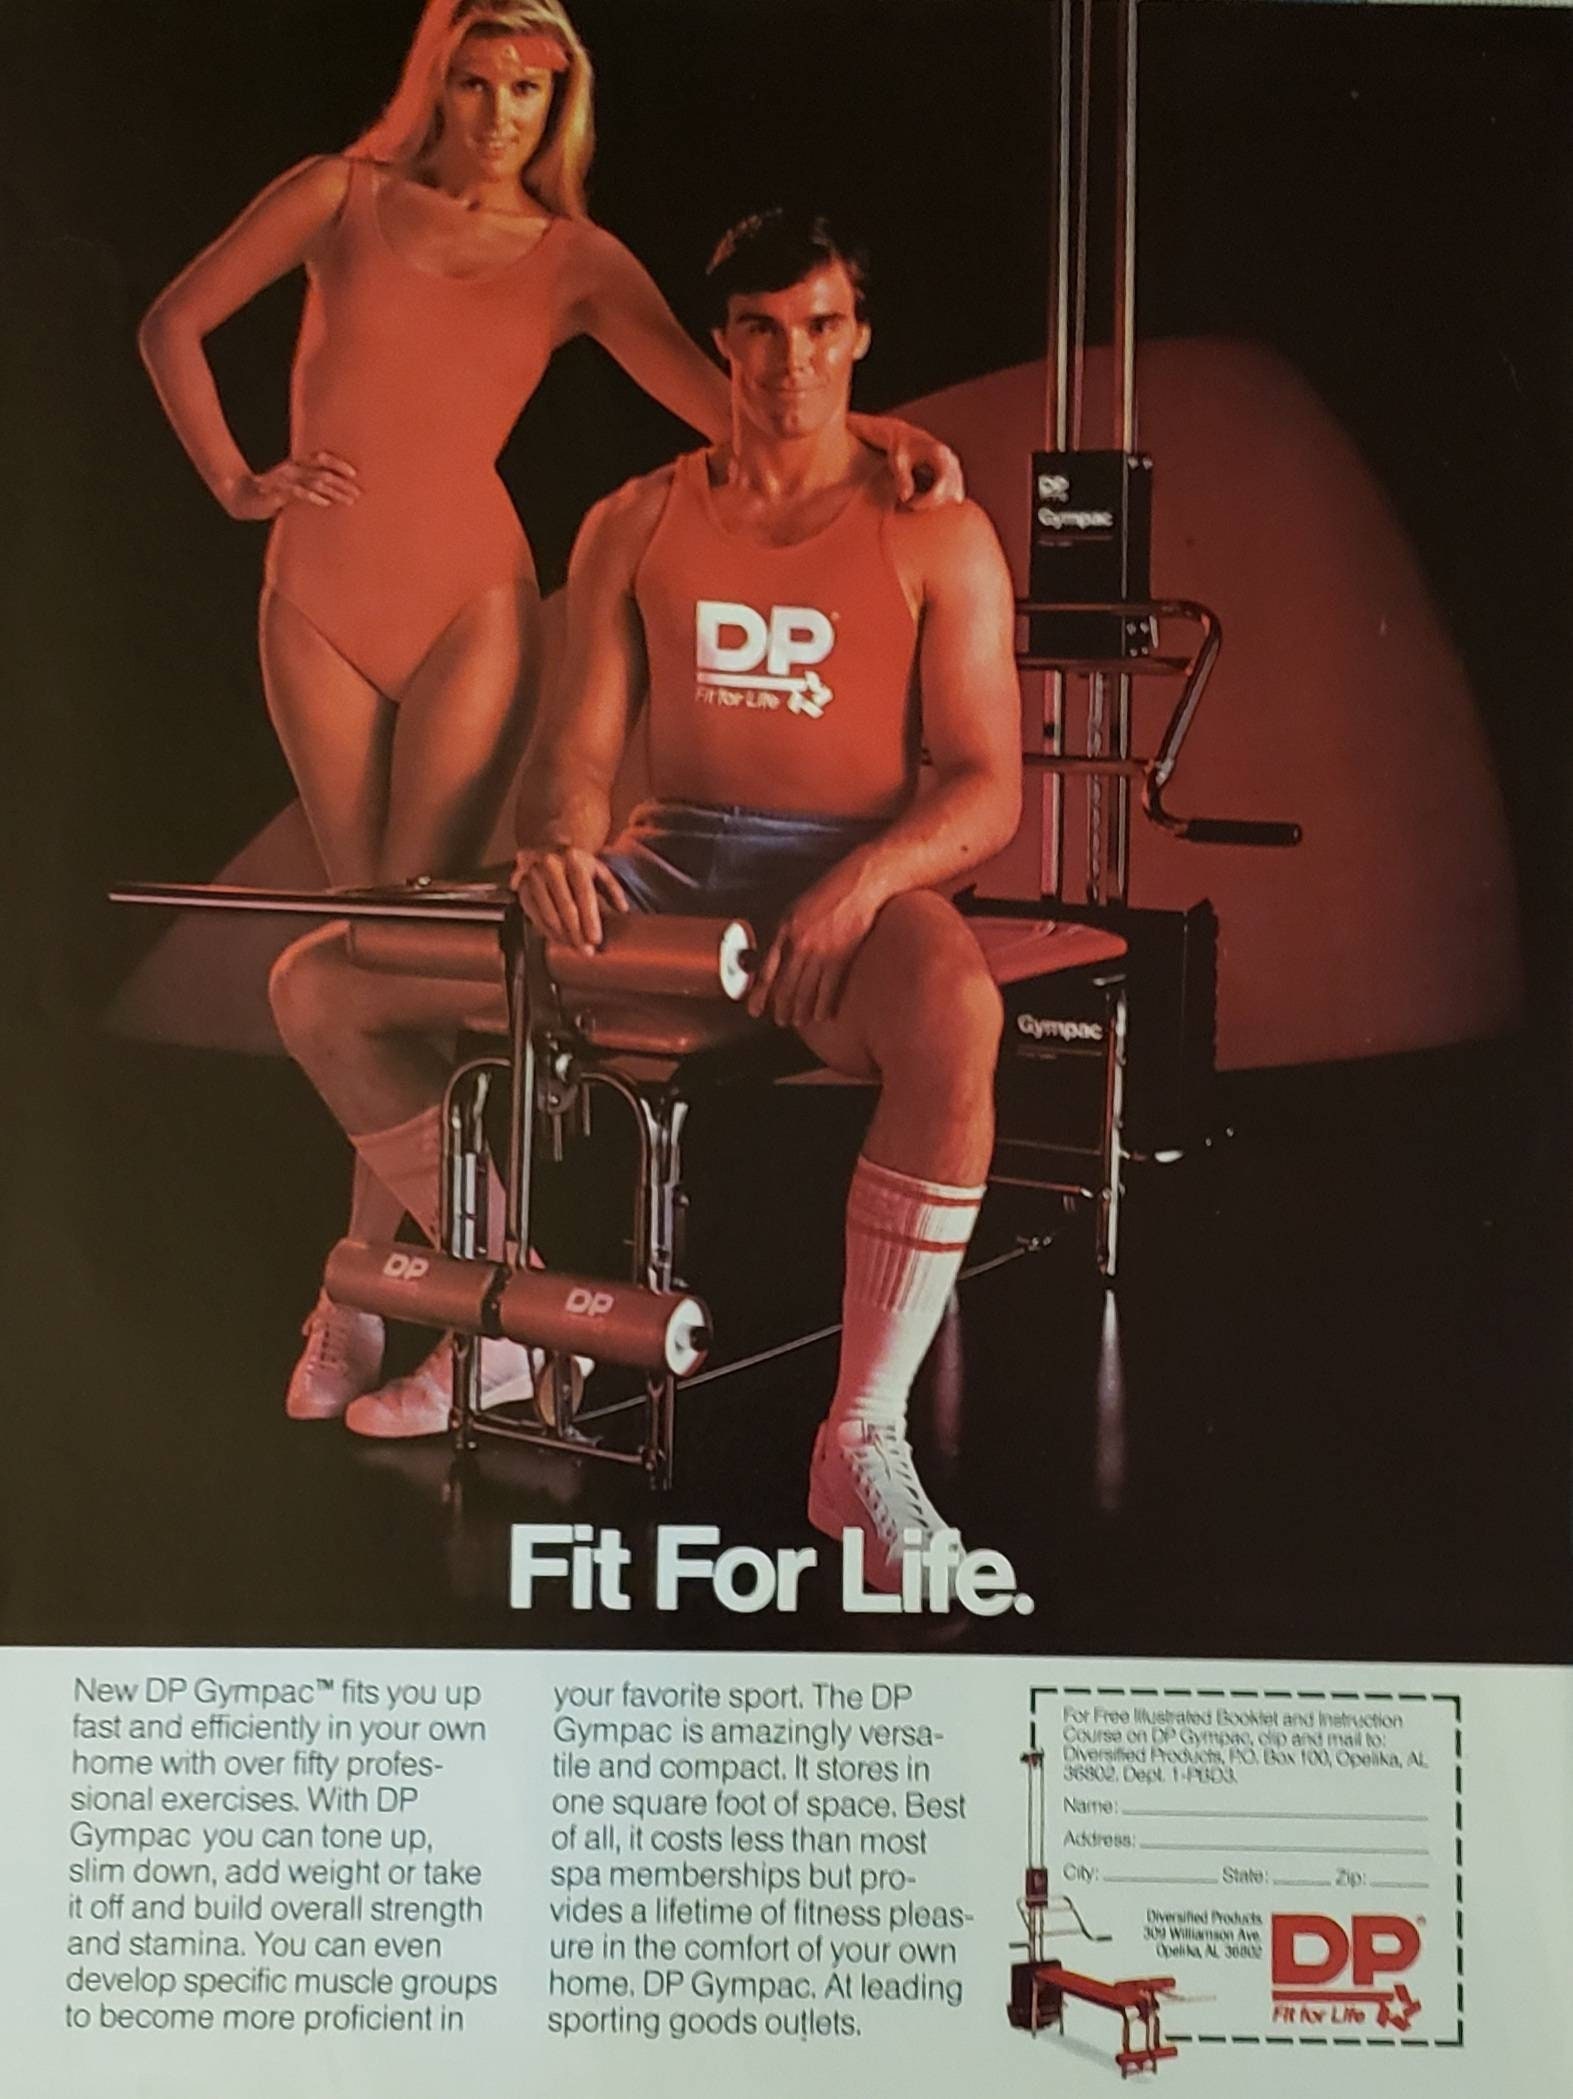 1984 DP GYMPAC Exercise Gym Equipment Fitness Vintage Print Ad